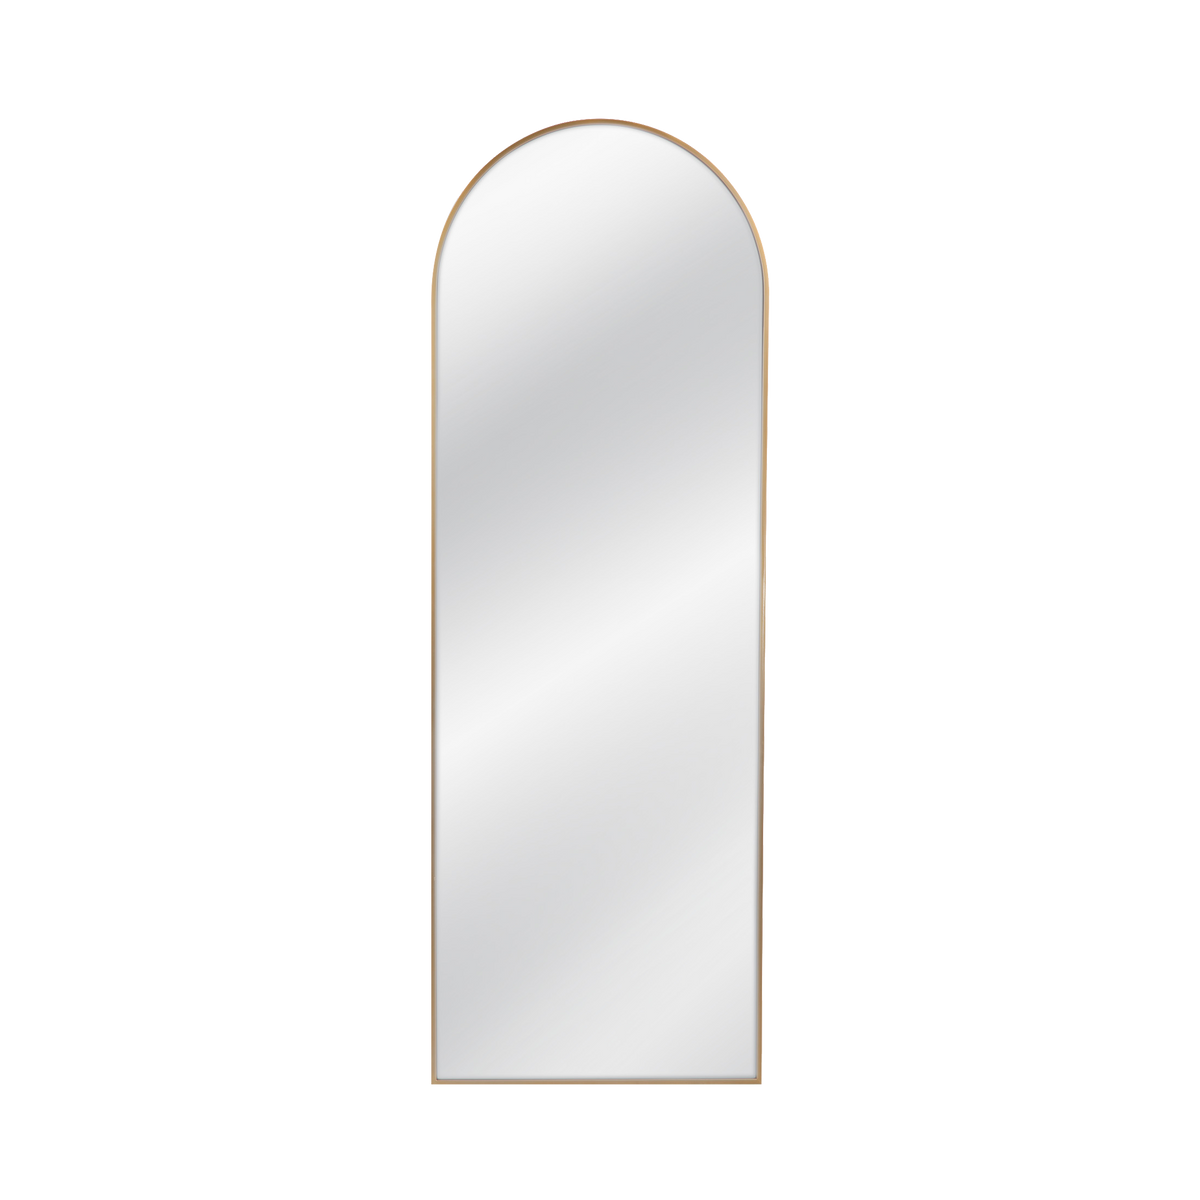 The Arched Top Floor Mirror features a rectangular shape with arched top and an satin brass colored frame.